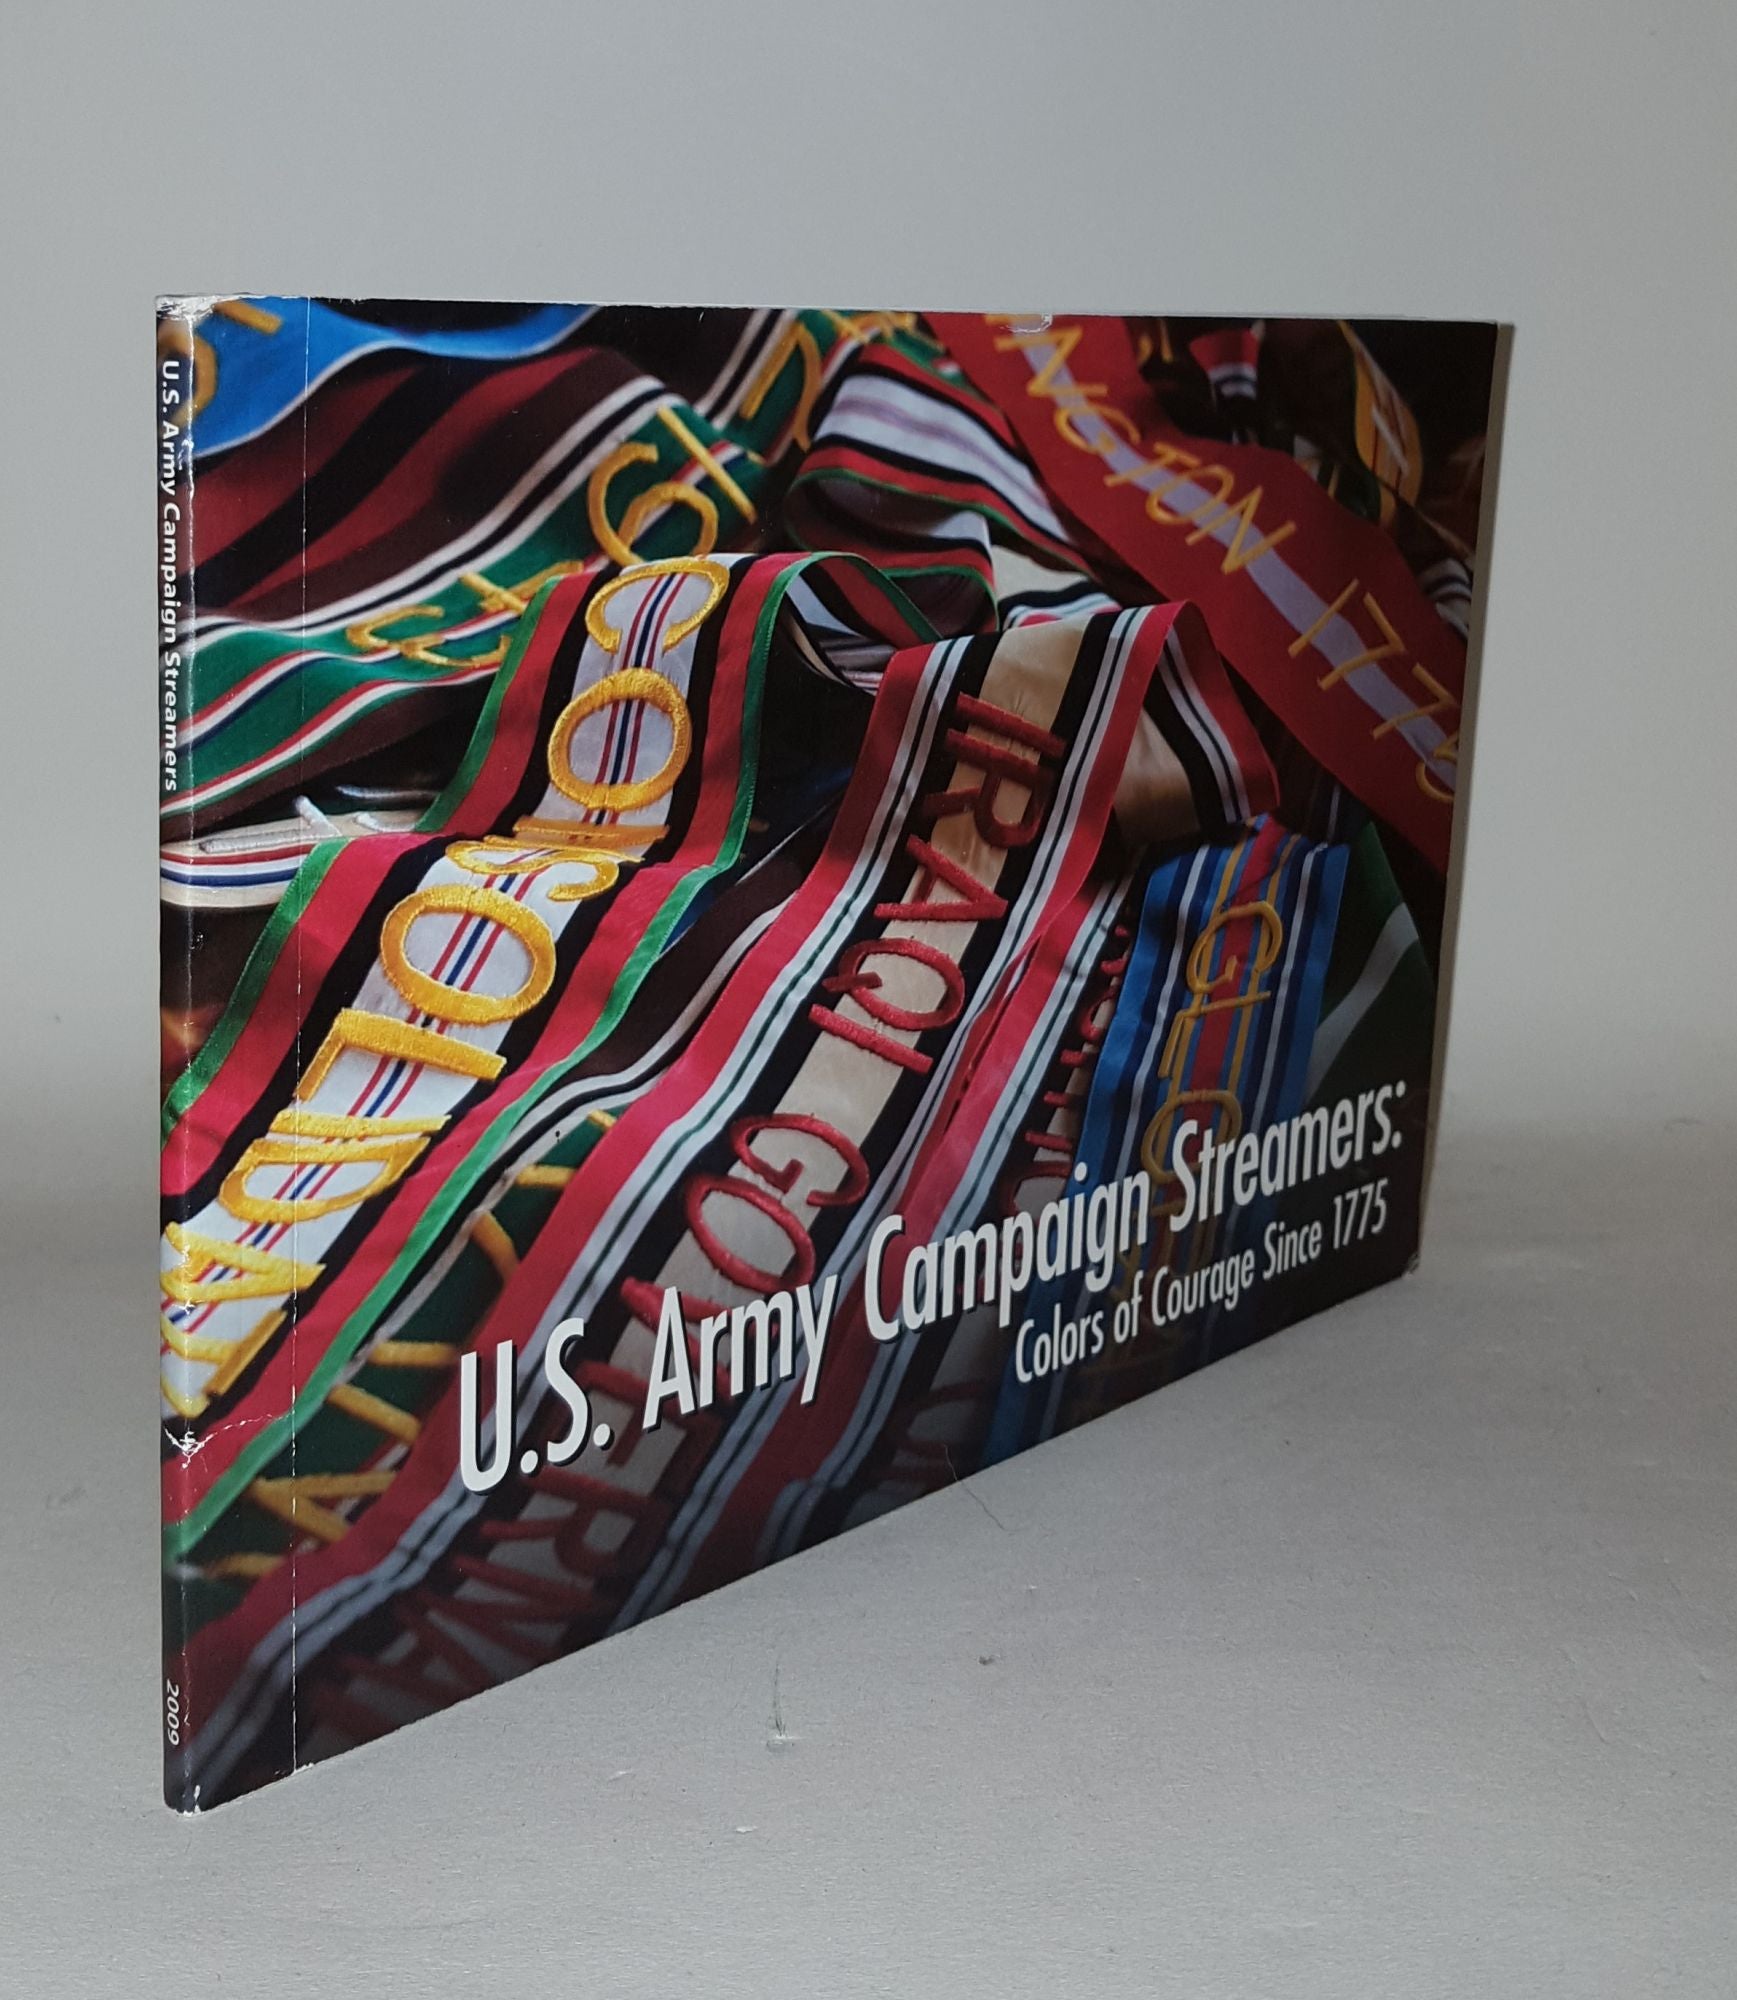 WILSON John B. - Us Army Campaign Streamers Colors of Courage Since 1775